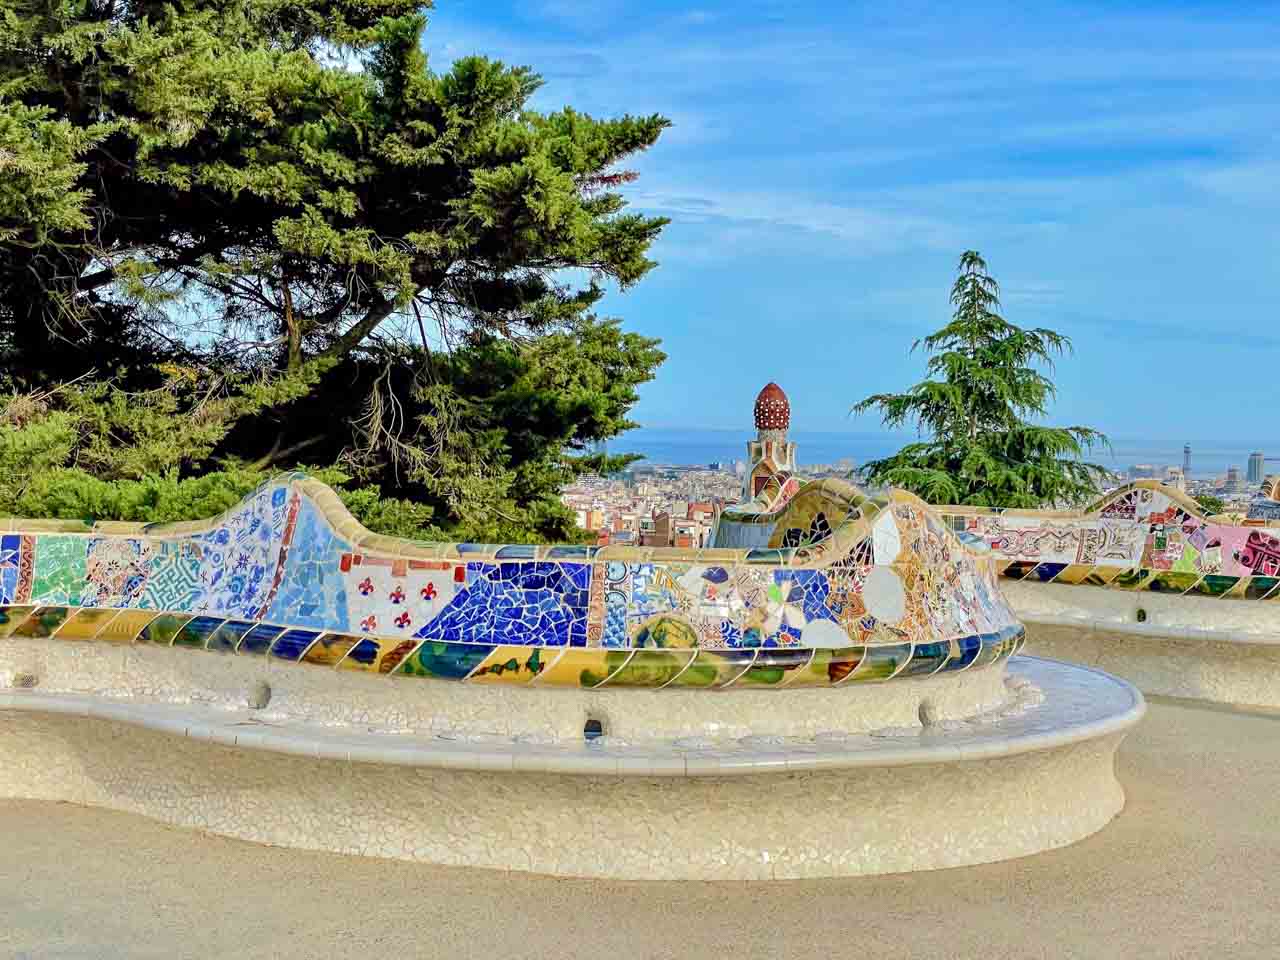 A winding snake-like bench covered in a mosaic of coloured broken tiles.